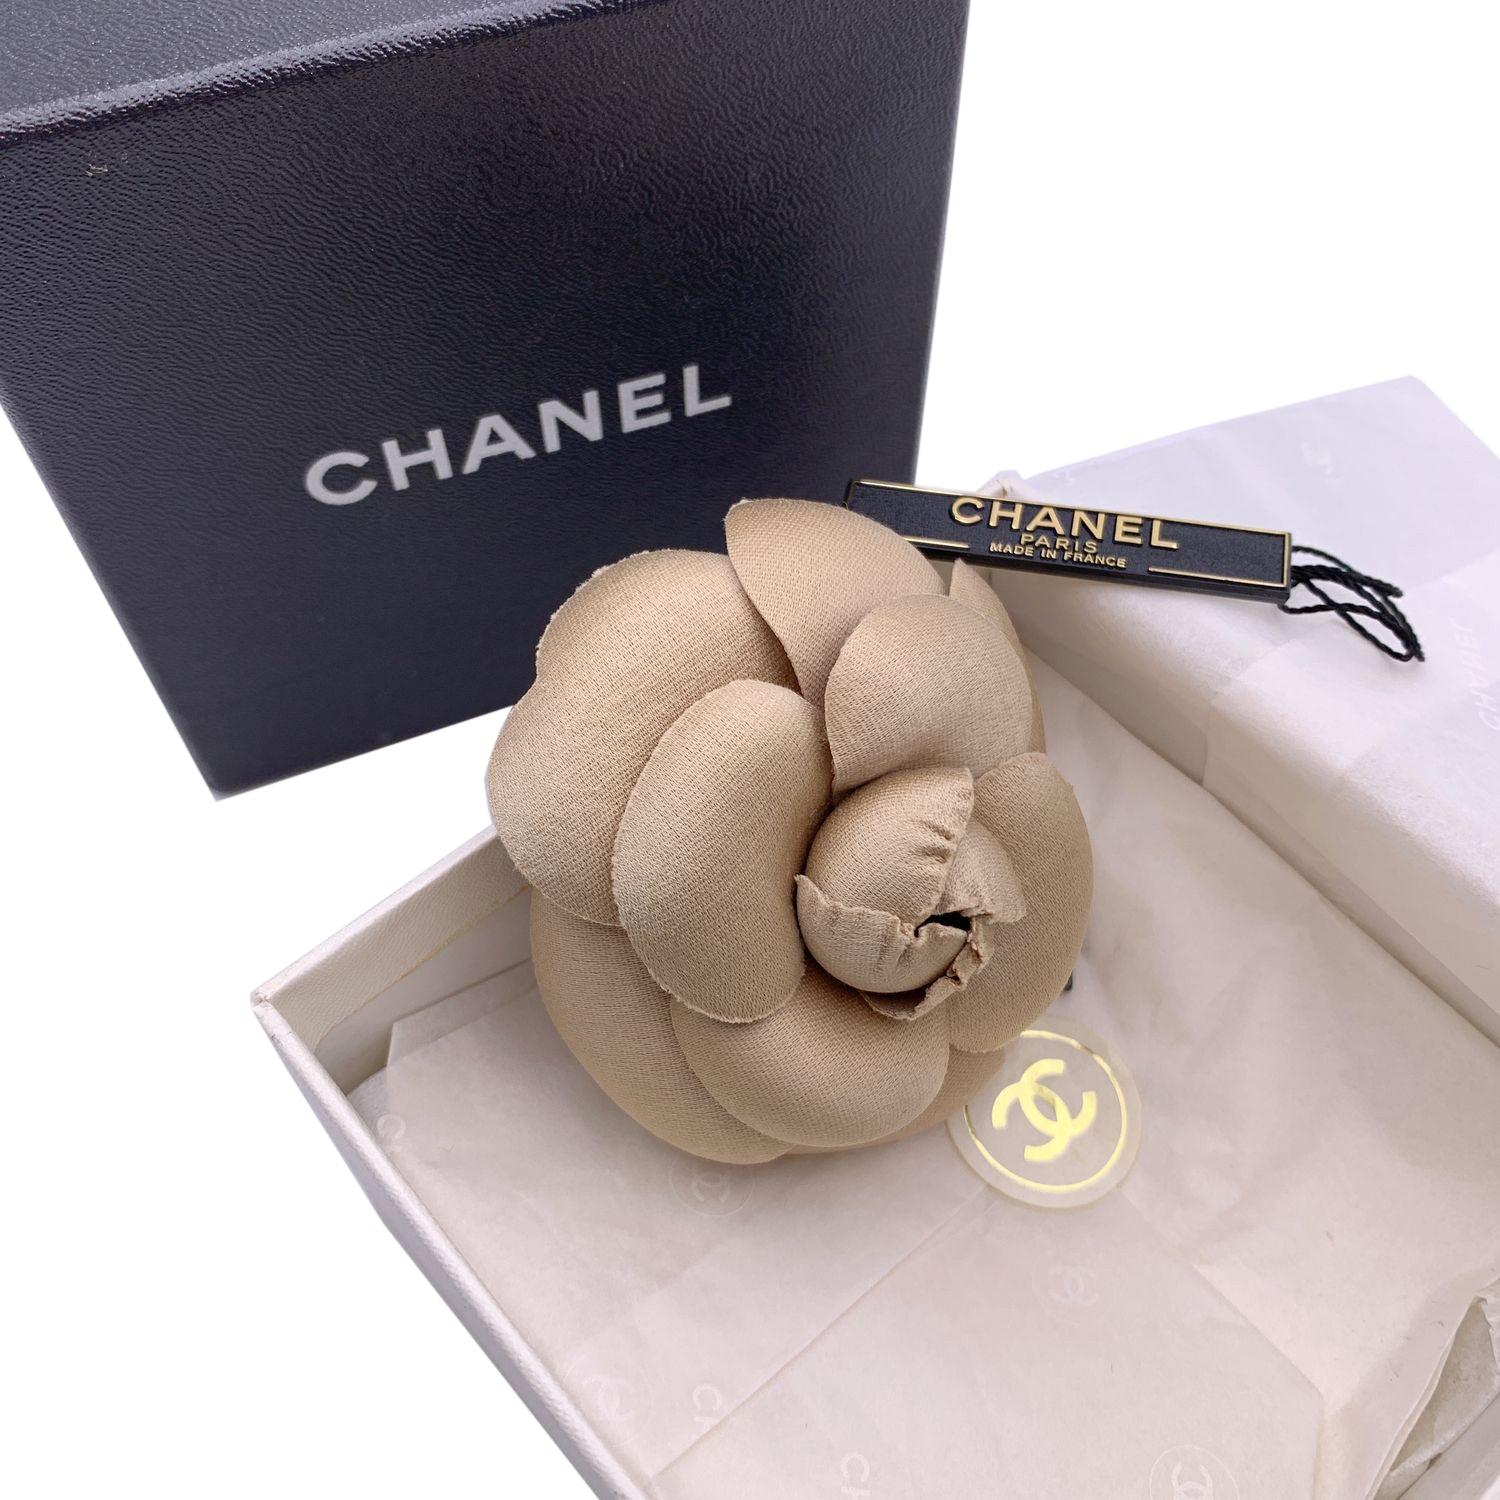 Chanel Vintage Camelia Camellia Flower Pin Brooch. Beige fabric petals. Safety pin closure. Measurements: diameter: 3 inches - 7.6 cm. 'CHANEL - CC - Made in France' oval tab on the back Condition A - EXCELLENT Gently used. Chanel box included.